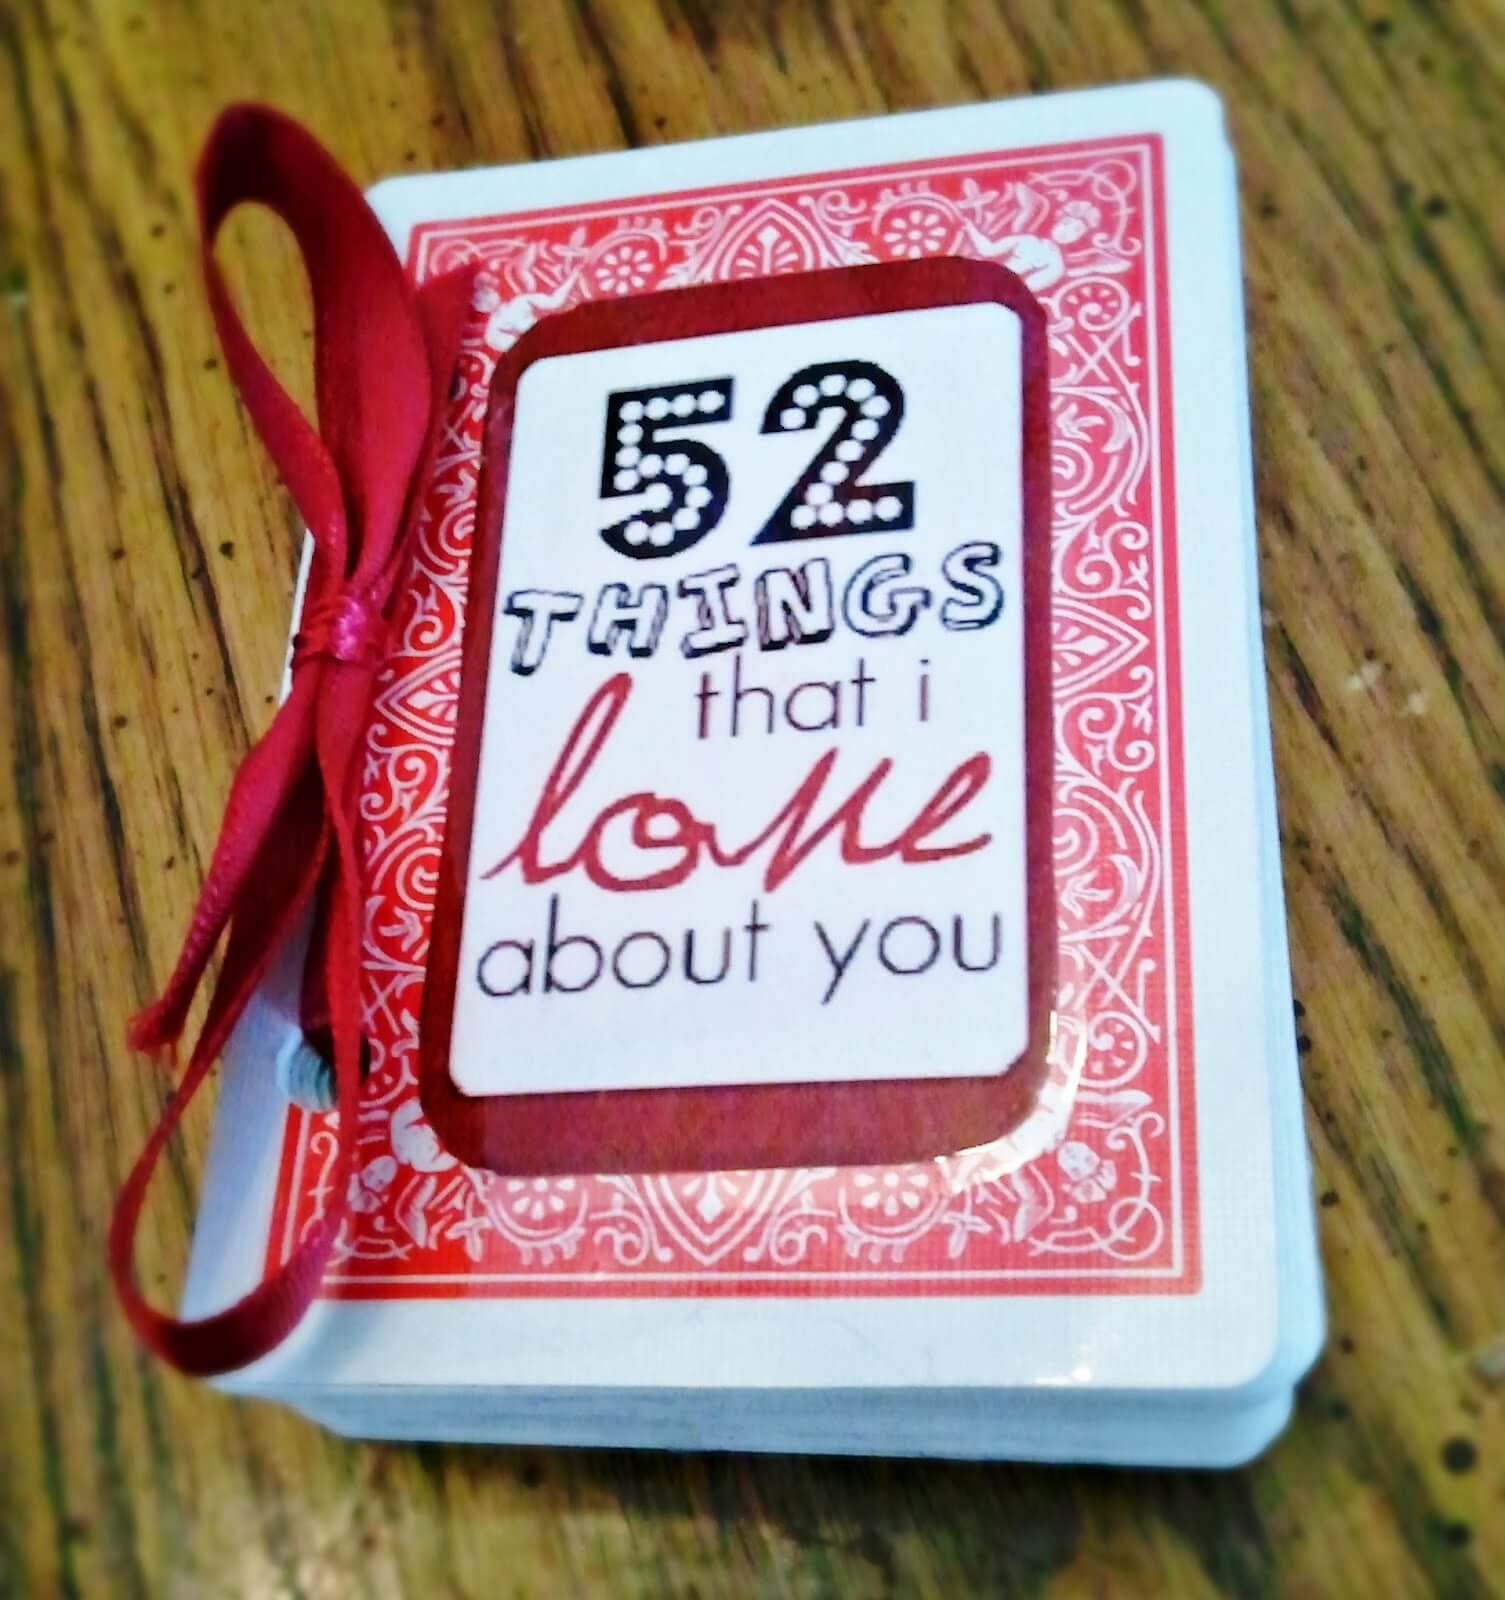 28+ [ 52 Things I Love About You Cards Template ] | 20 Inside 52 Things I Love About You Cards Template